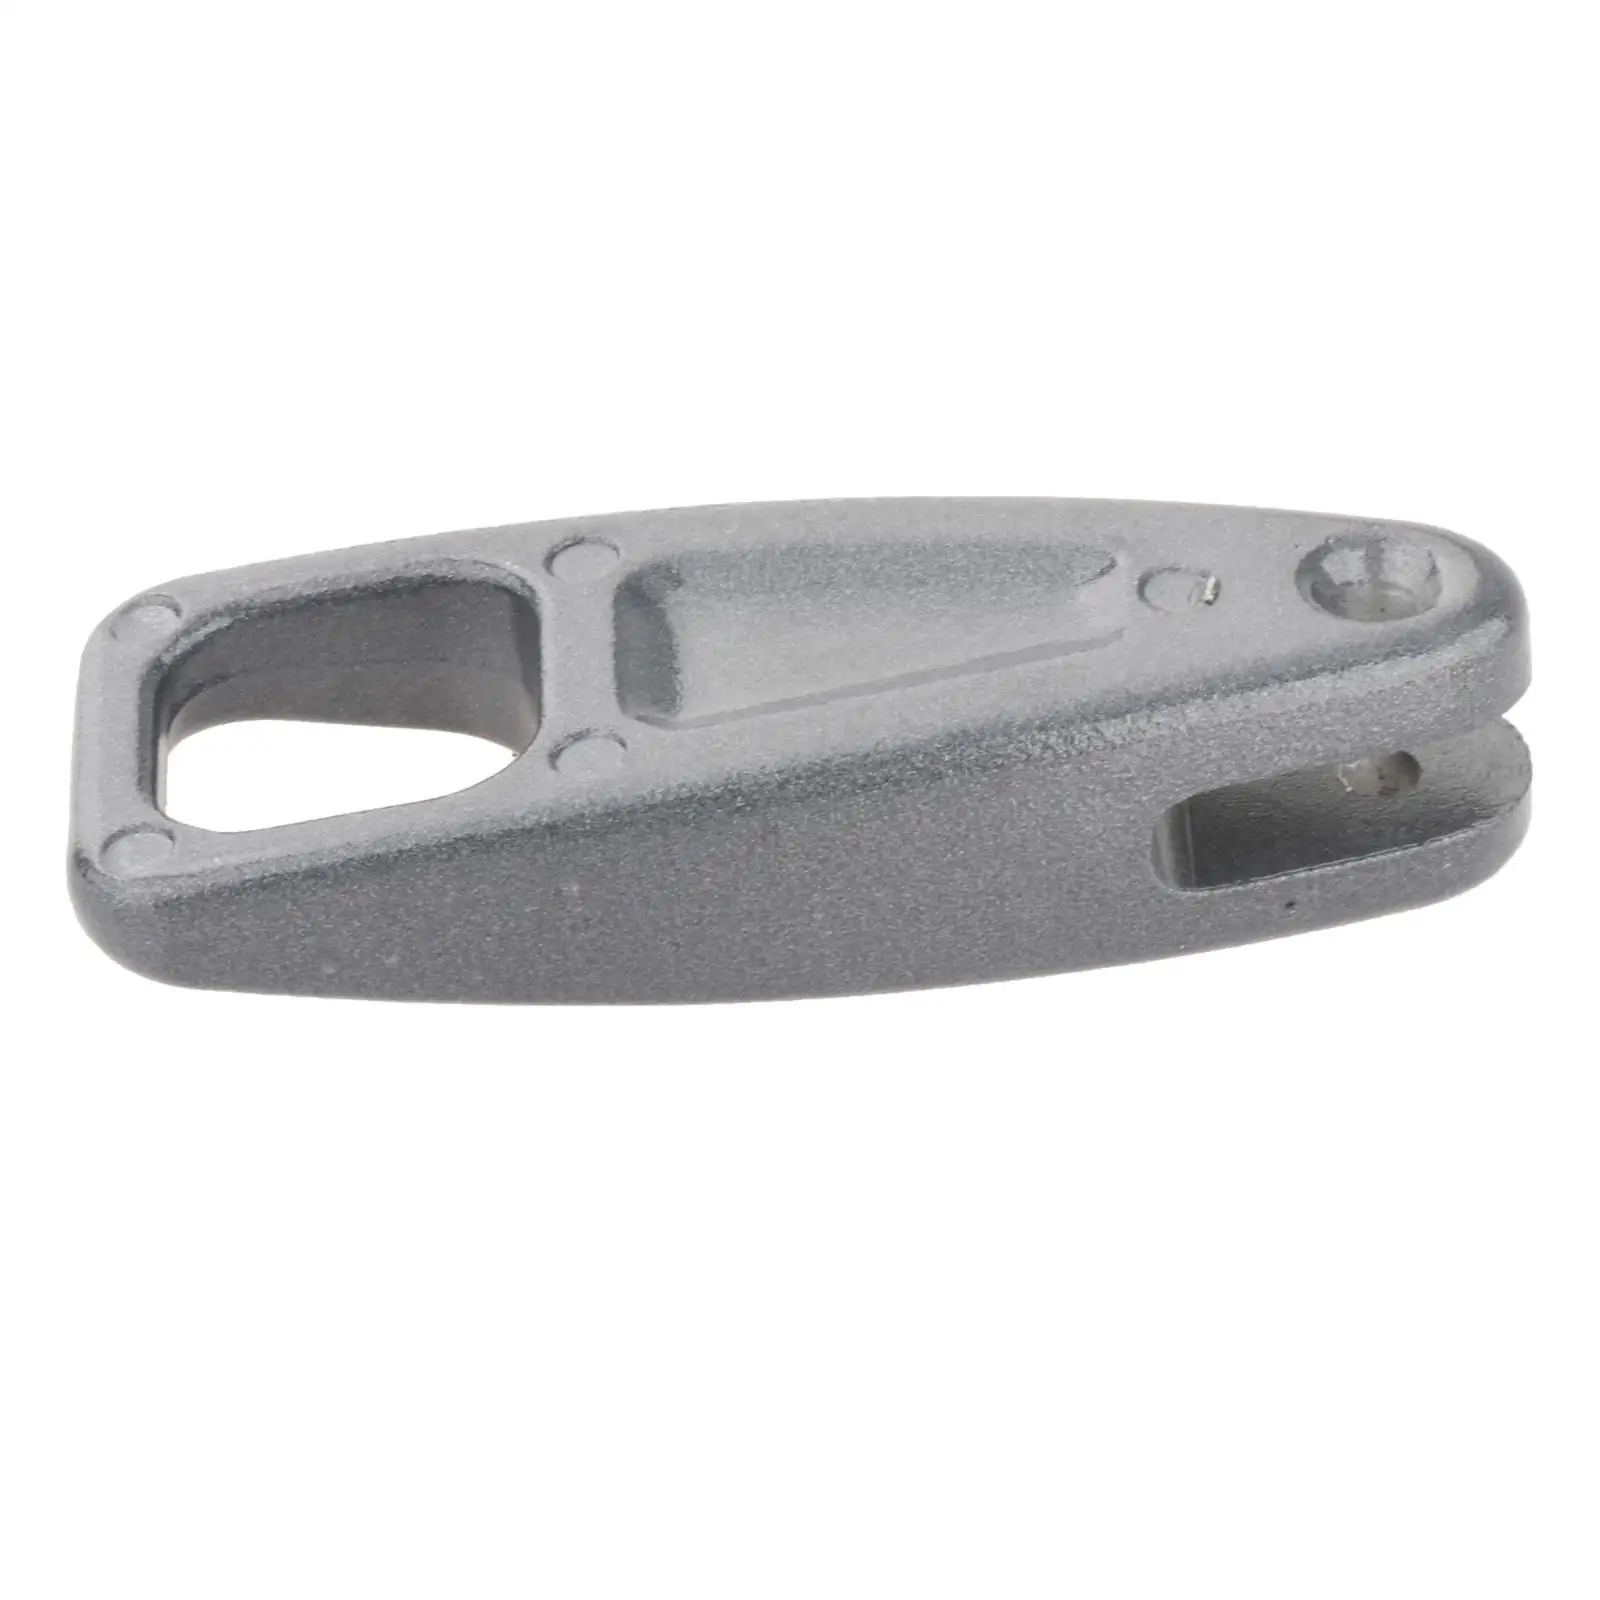 Handle Transom Clamp for HDX 663-43118-01-4D